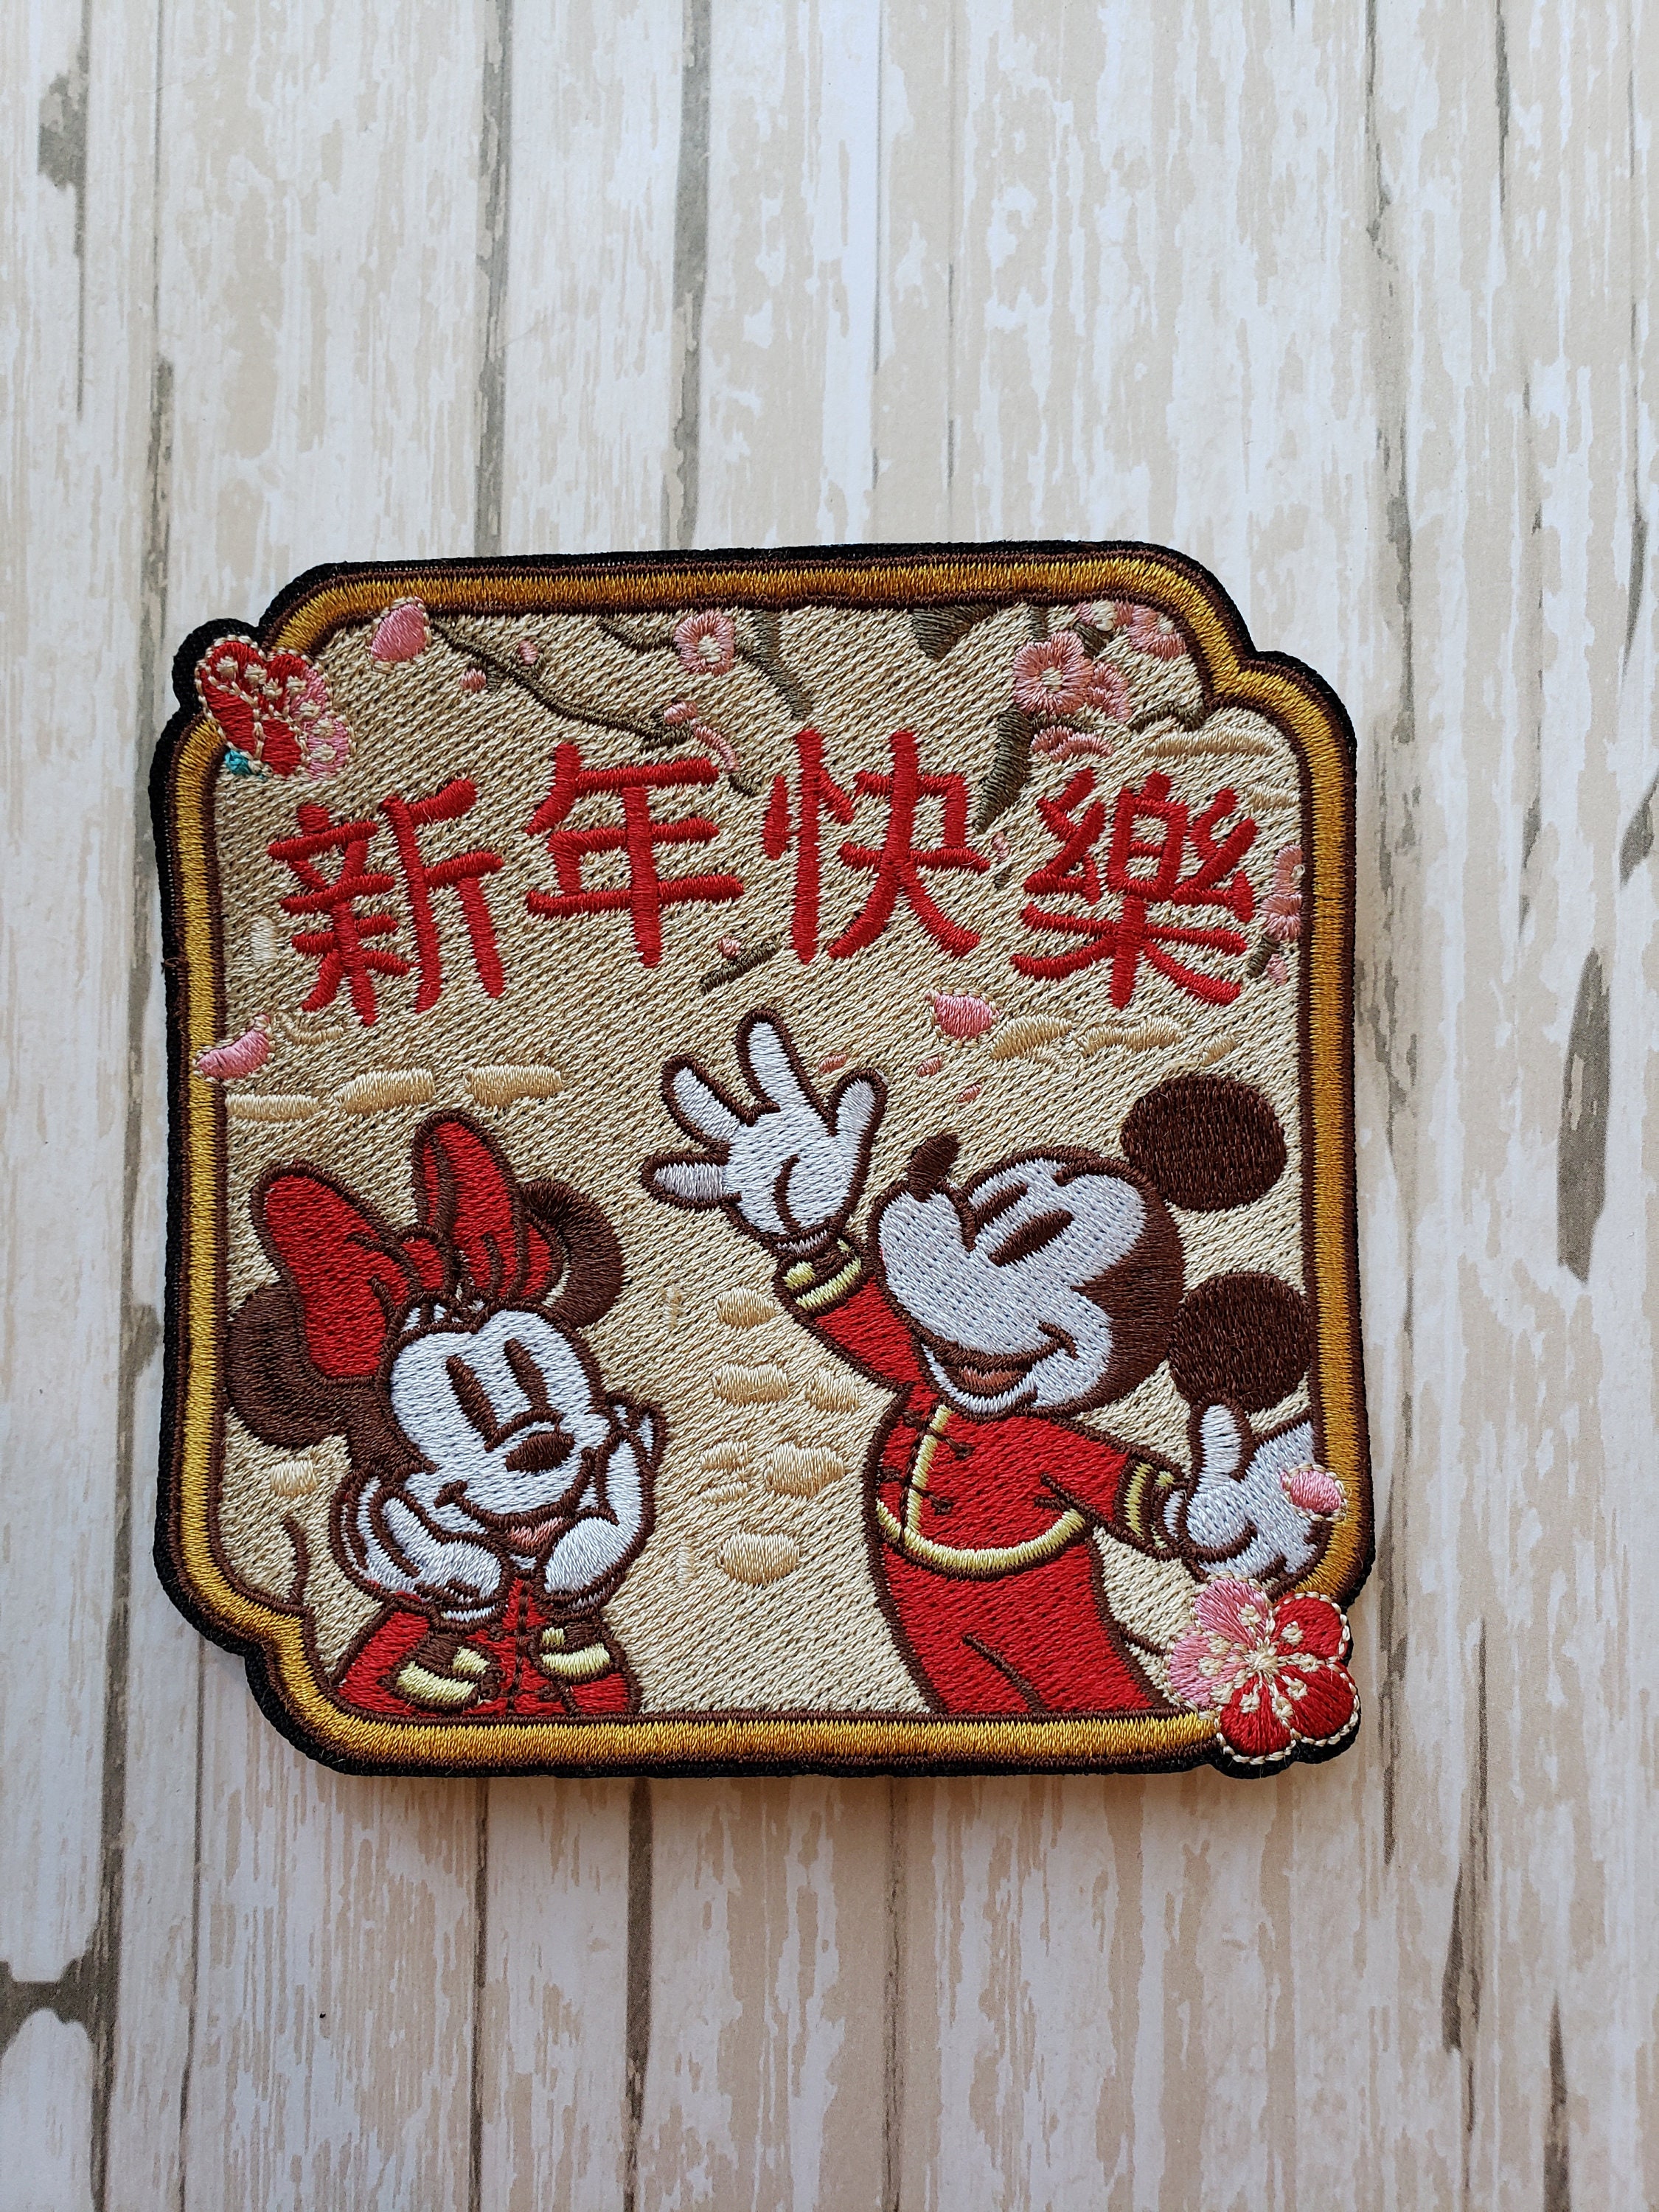 DisneyIron on Patches for Clothes Large Mickey Mouse Cartoon Image  Embroidery Sticker for Baby Bag Anime Patch for Clothes Decor